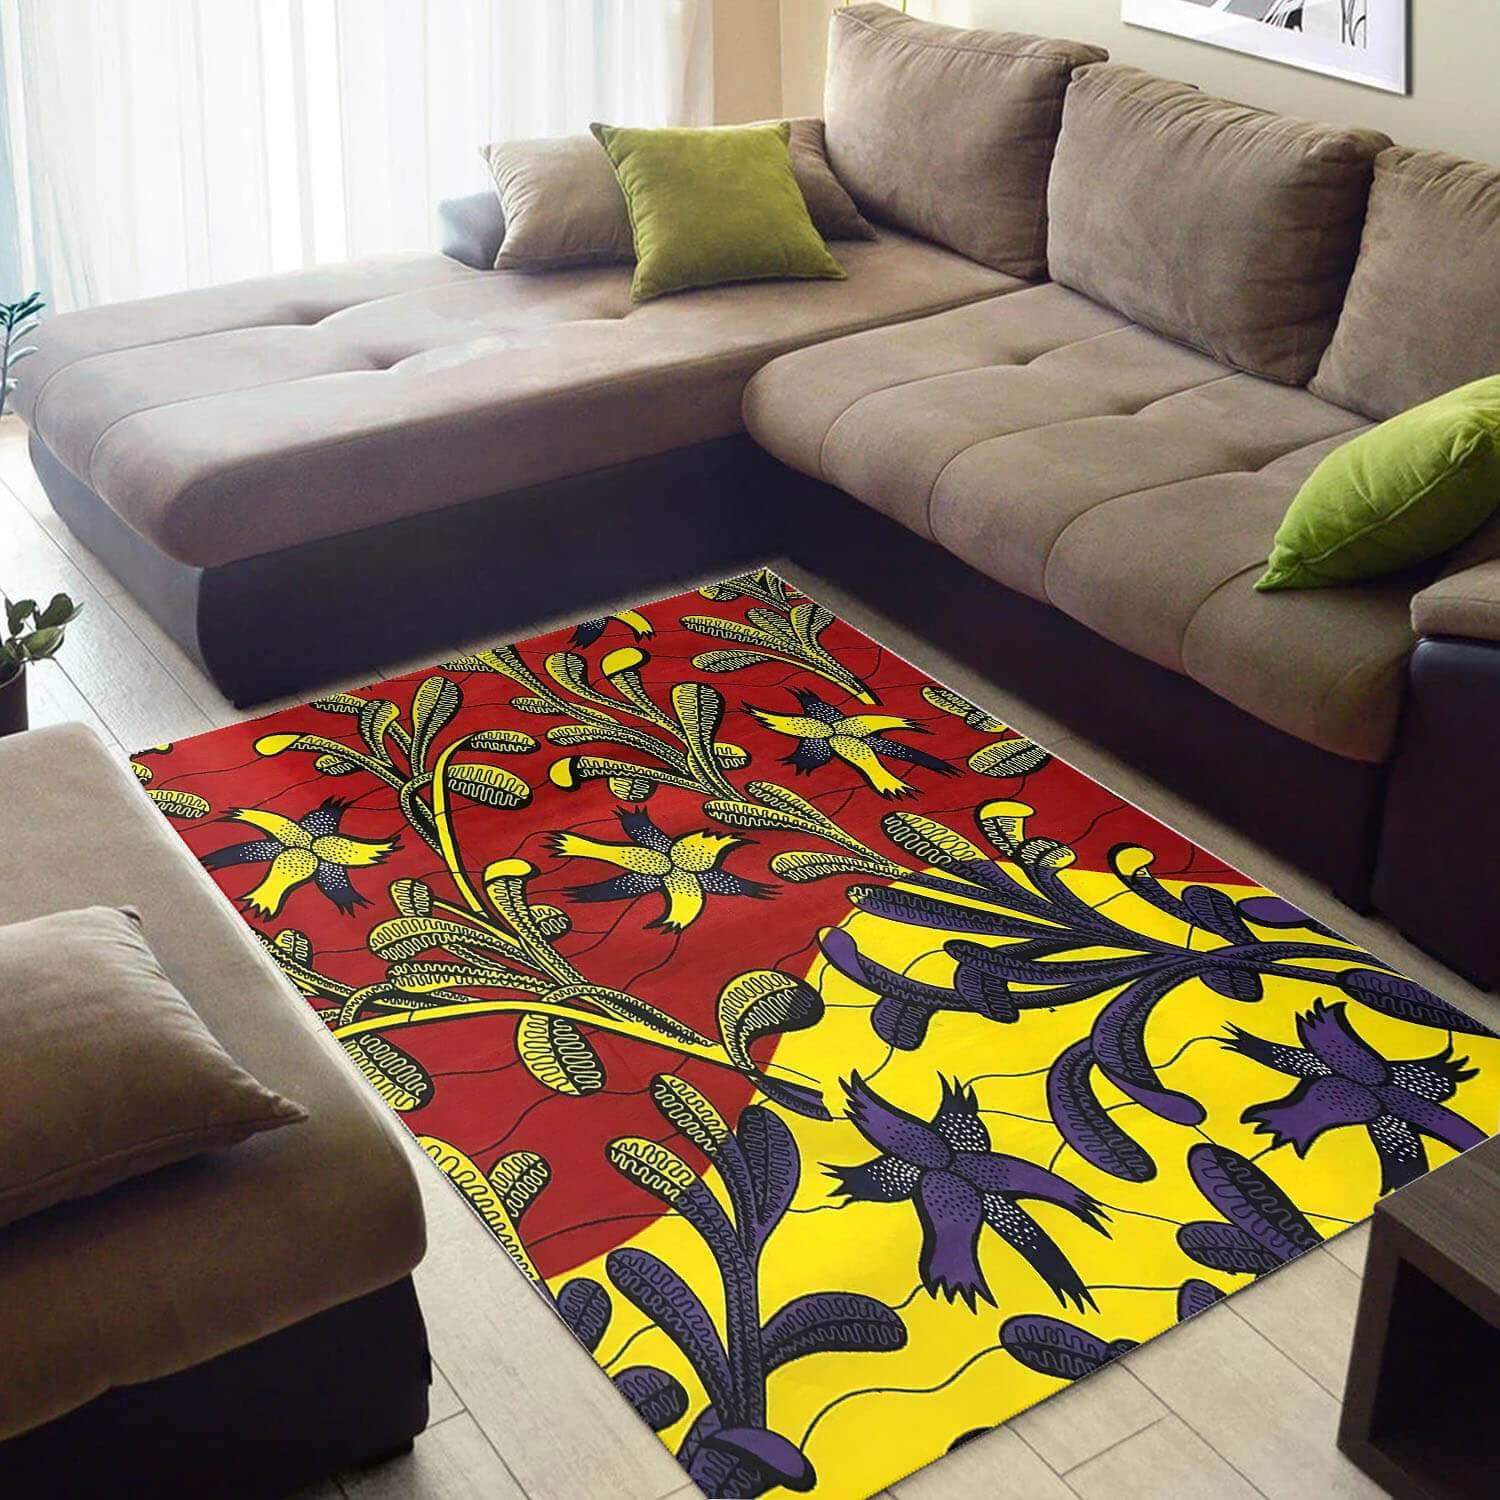 Beautiful African Amazing Black History Month Seamless Pattern Themed Carpet Inspired Living Room Rug